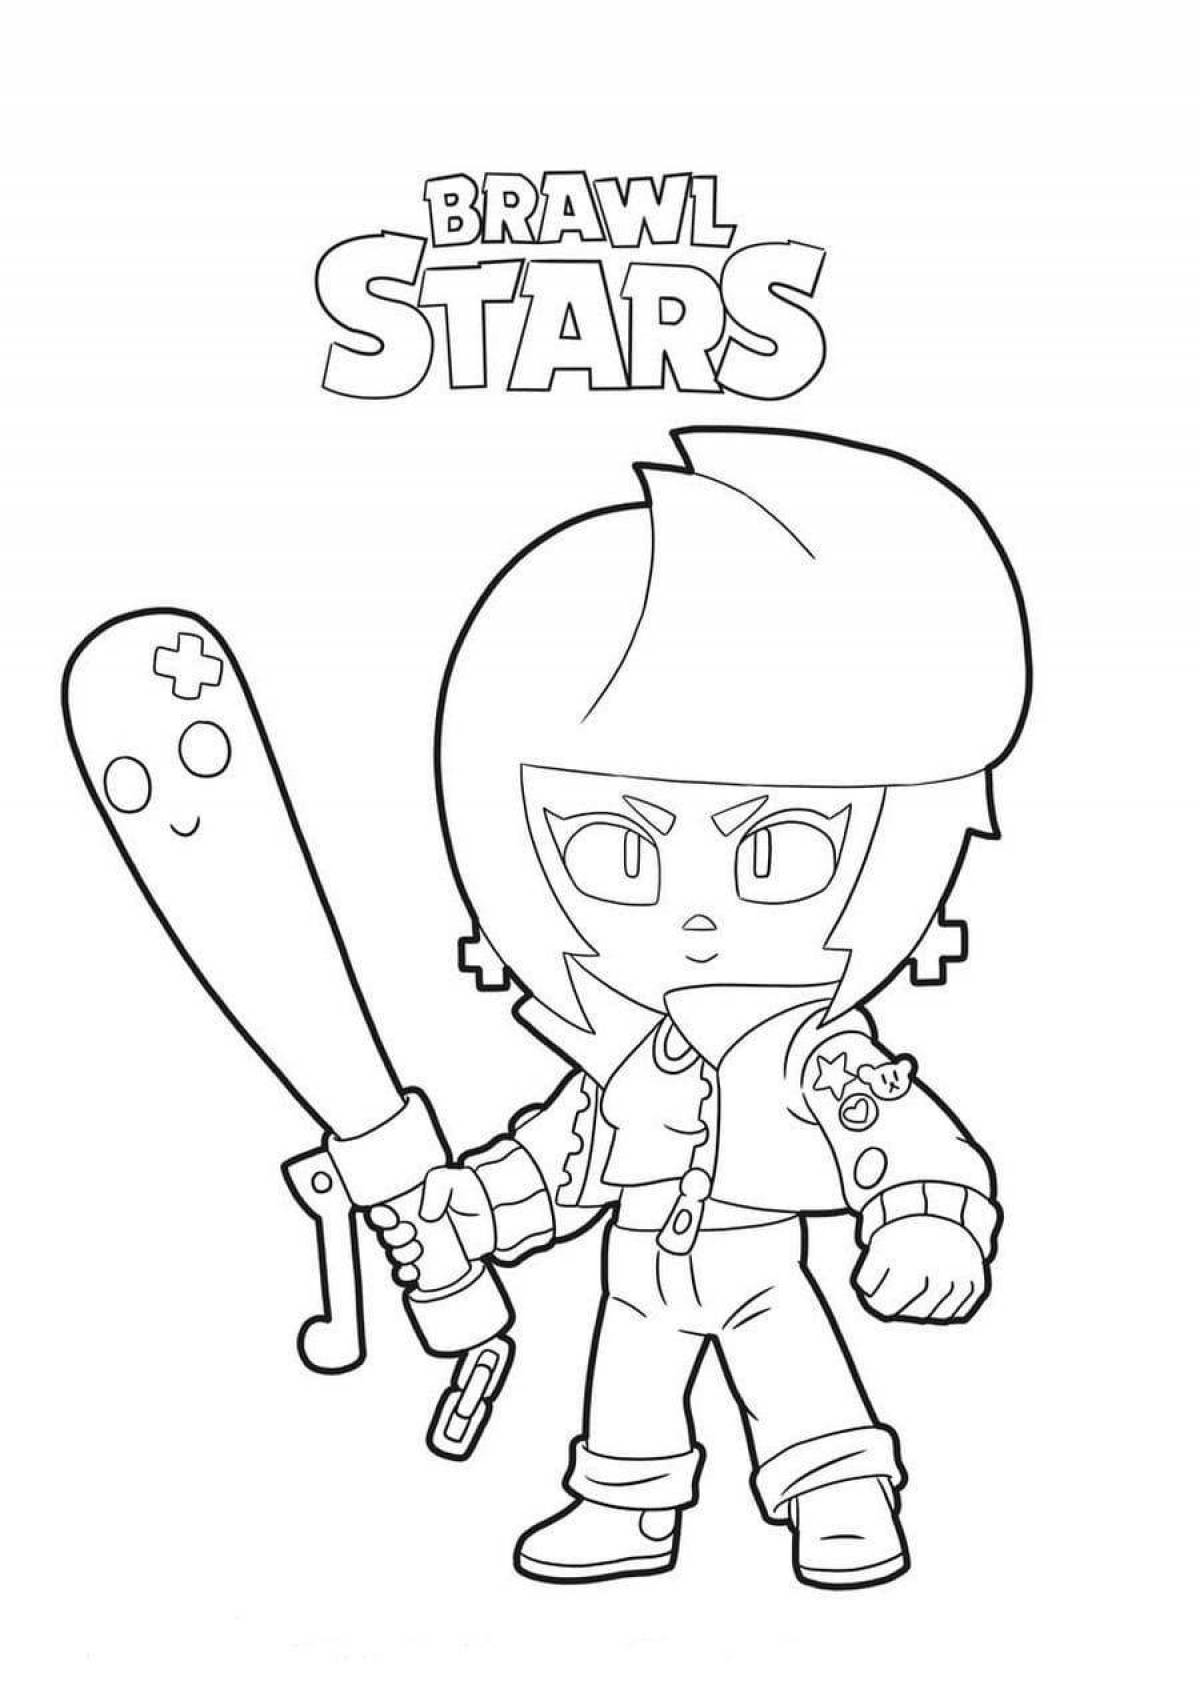 Shiny brown stars coloring pages for kids